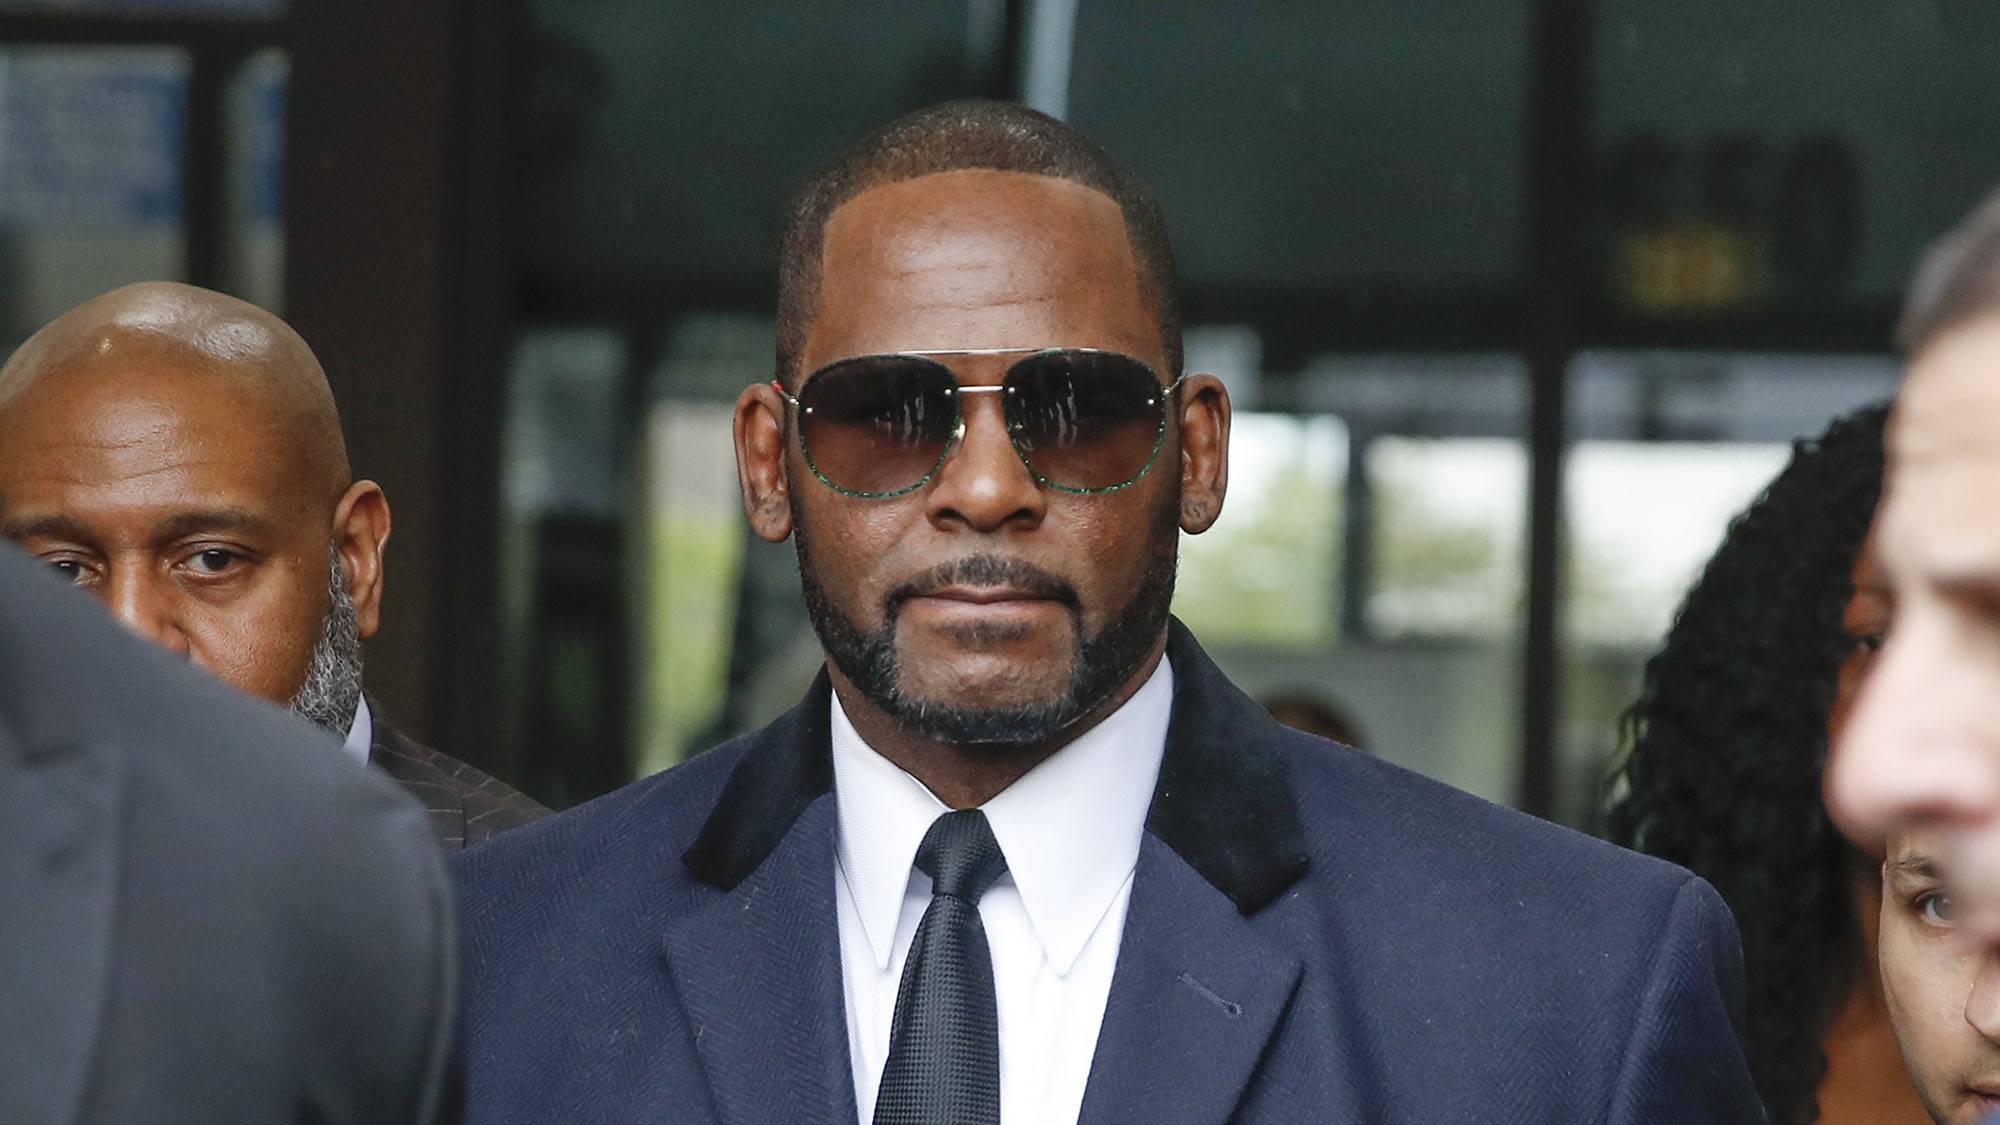 Xnxxyoung - Girl In Sex Videos Allegedly Recorded By R. Kelly Expected To Testify |  News | BET